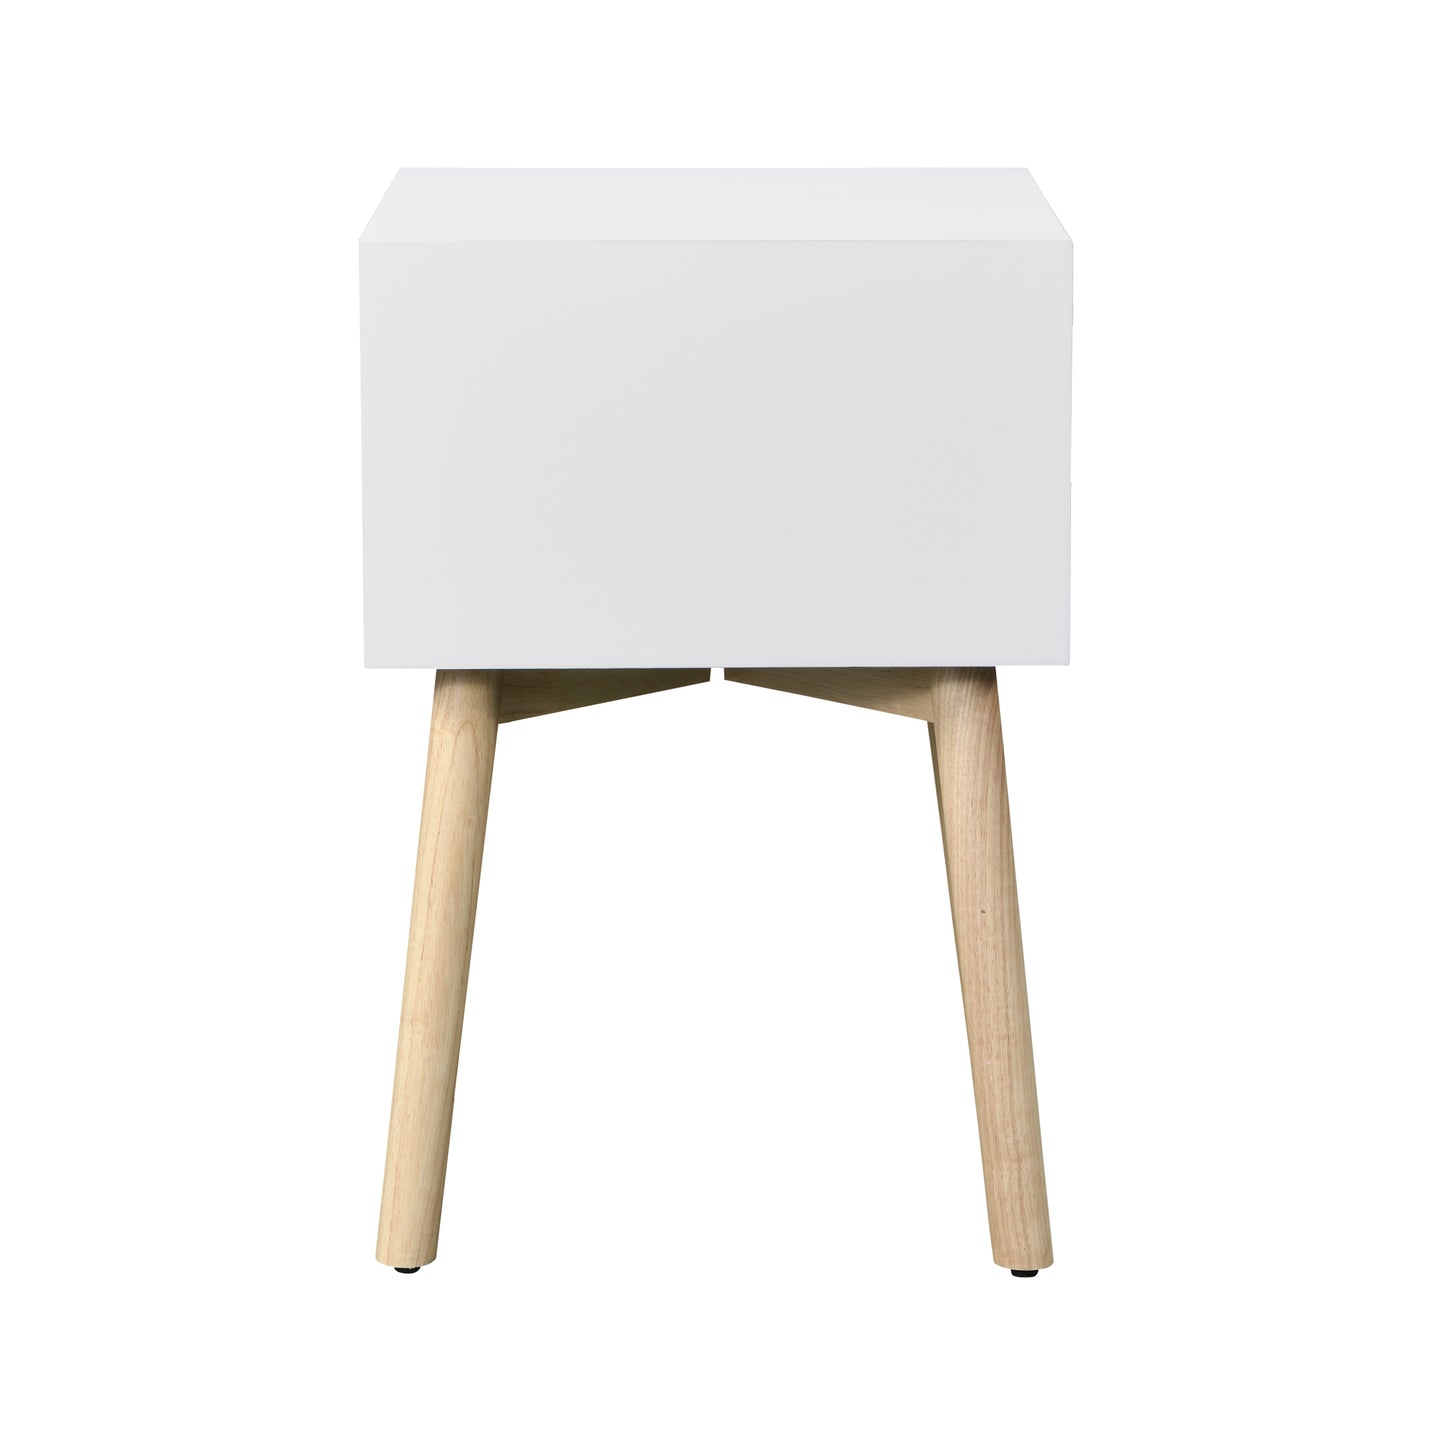 Side Table, Bedside Table with 2 Drawers and Rubber Wood Legs, Mid-Century Modern Storage Cabinet for Bedroom Living Room, White